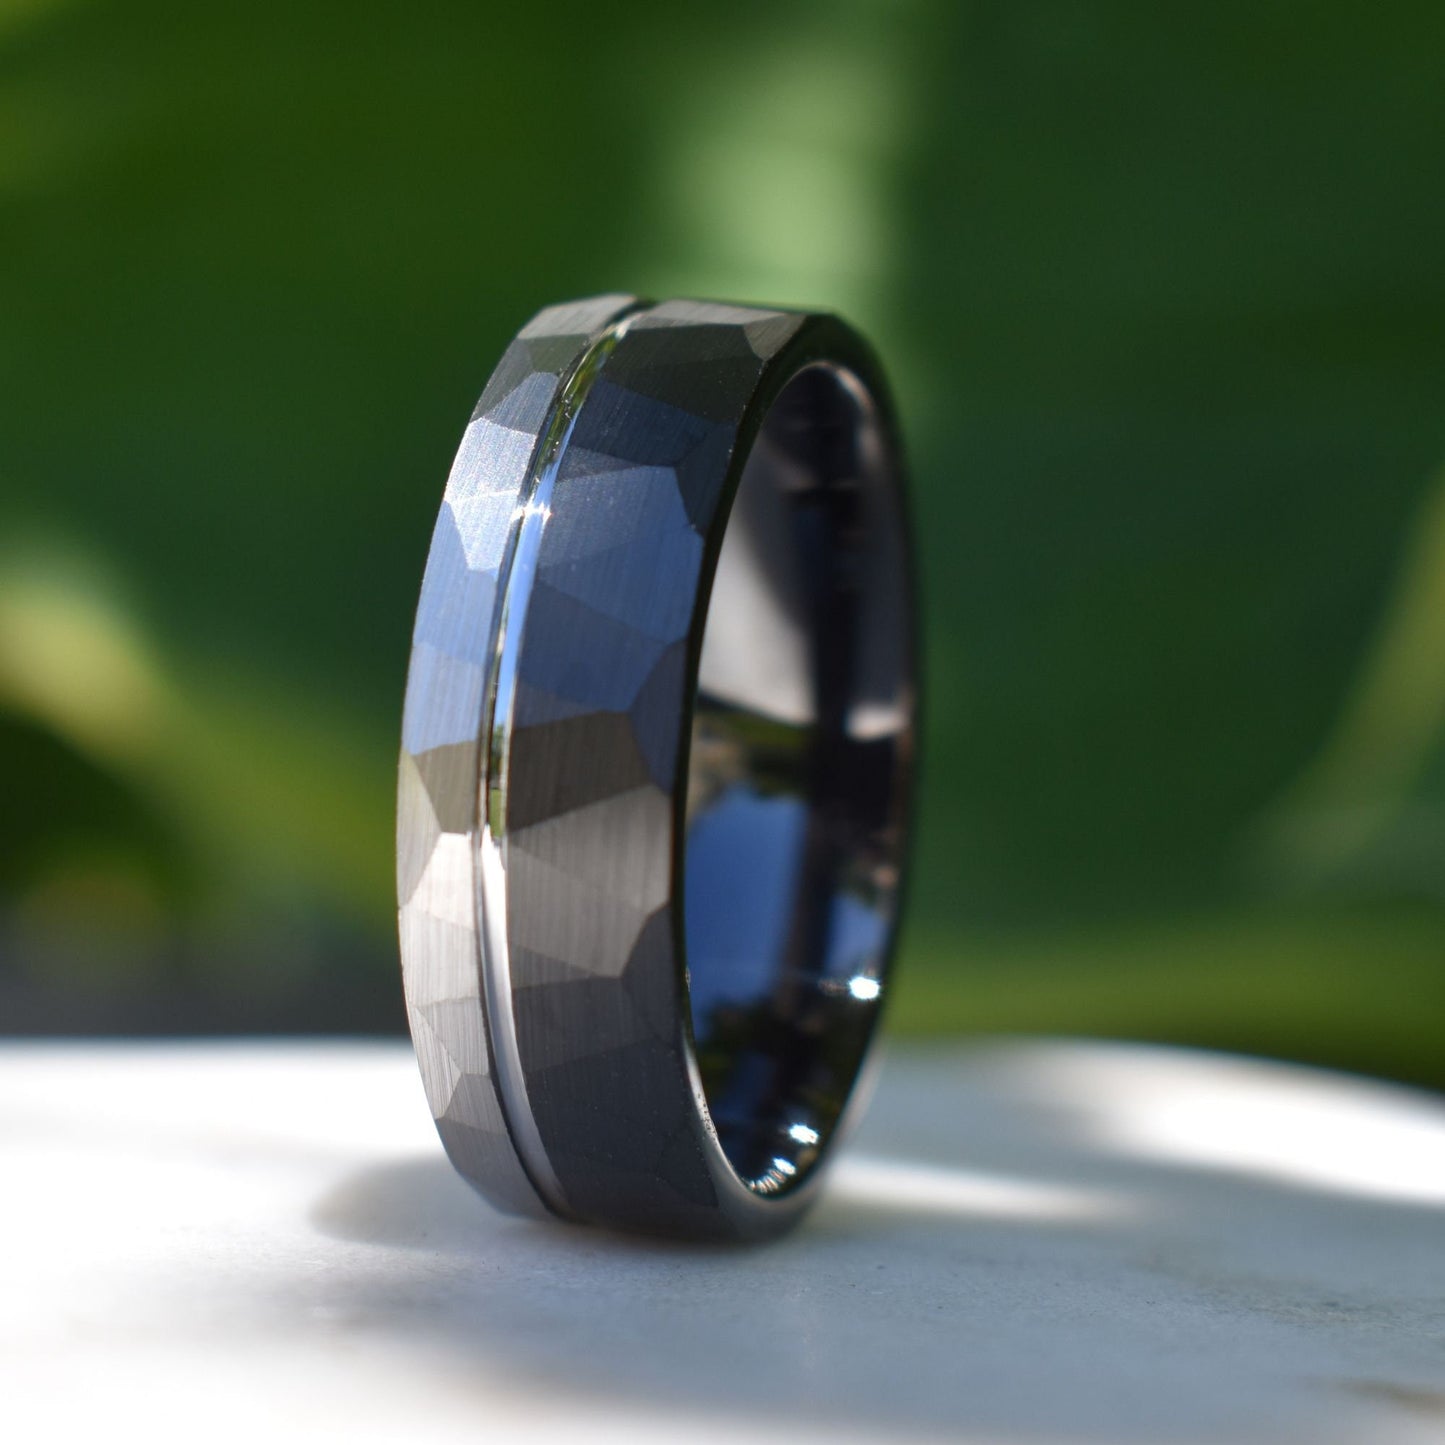 Hammered Tungsten Ring 8mm Black and Silver Brushed with Polished Silver Accent, Mens Ring, Mens Wedding Band